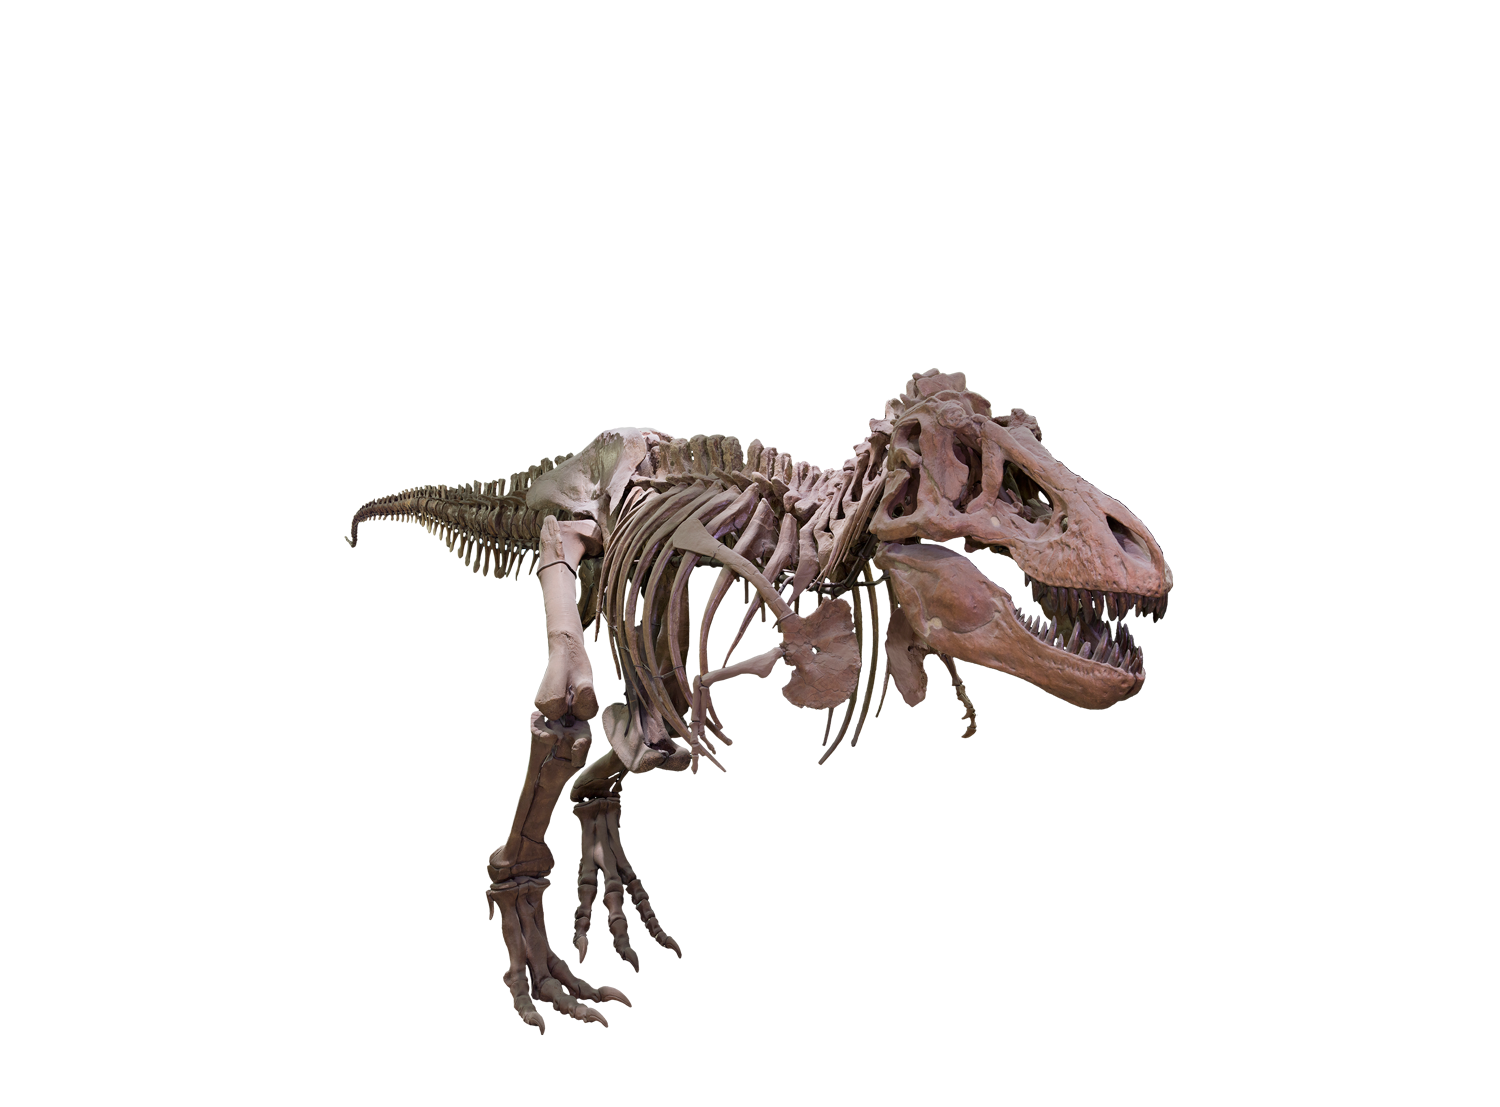 T Rex Image Free Clipart HQ PNG Image